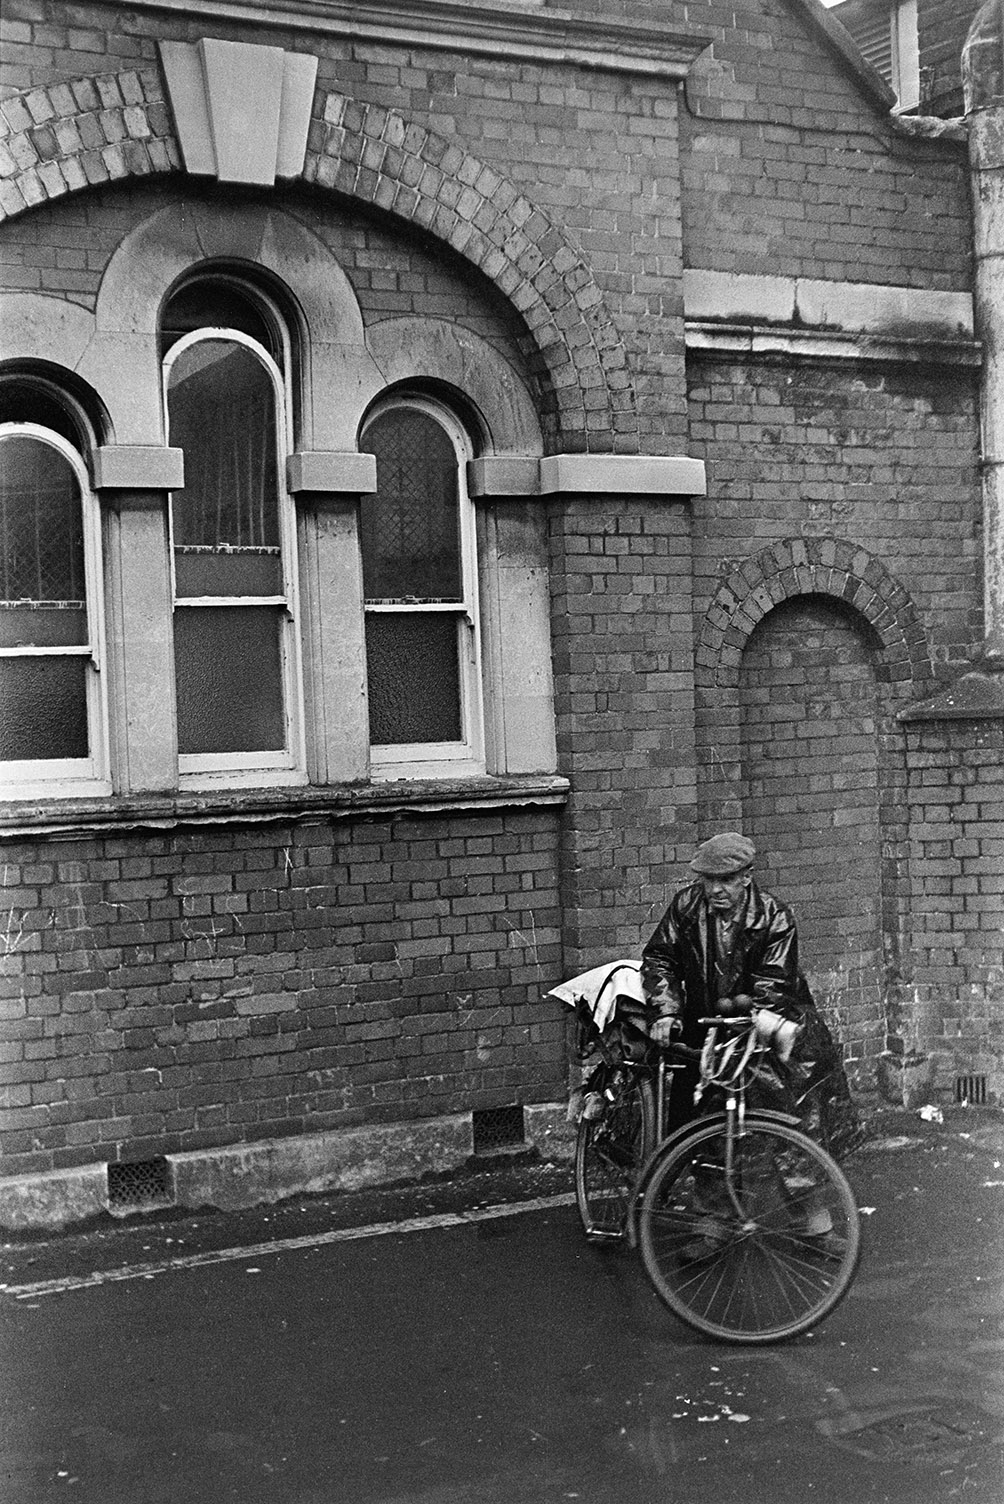 A man with a bicycle outside a building with arched windows in Barnstaple. He is wearing a raincoat.